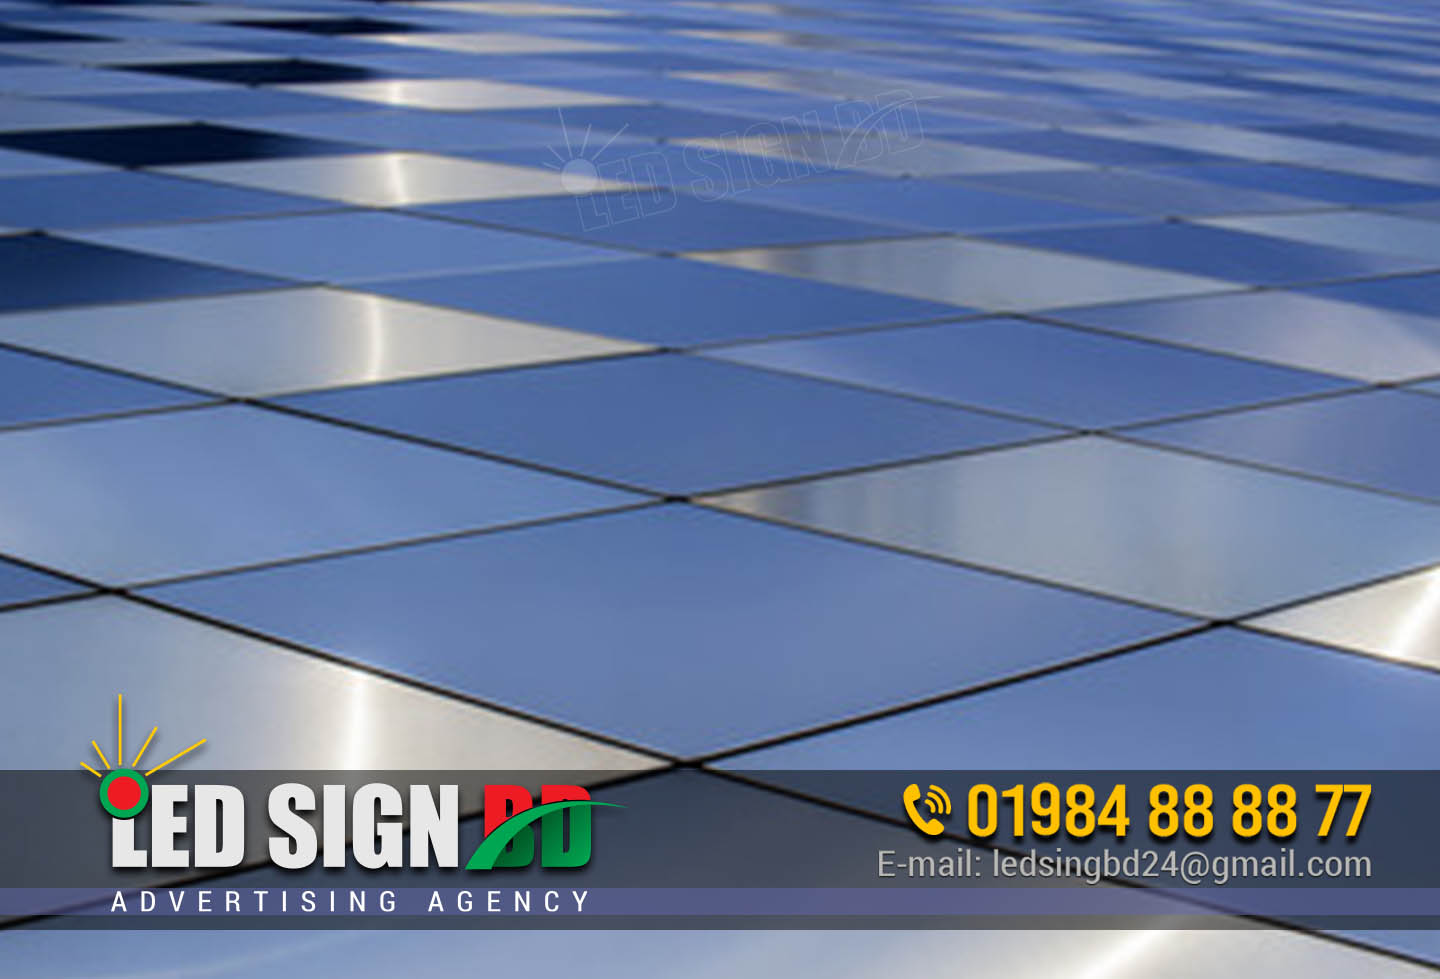 ACP/Aluminium Composite Panel Cutting BD Price Leave a Comment / Acp Off Cut Board, Composite ACP Sheet, LED Acrylic Sign / By LedSjgnBdltd We are the leading ACP board supplier in Dhaka and have been in business for over 10 years. We offer a wide range of high quality ACP boards that are perfect for any commercial or residential project. Our experienced team can help you choose the right ACP board for your needs and budget. ACP boards are a popular choice for both indoor and outdoor use. They are durable and easy to maintenance. ACP boards are also fire resistant and soundproof. This makes them an ideal option for use in high-traffic areas. ACP/Aluminium Composite Panel Cutting BD Price. ACP/Aluminium Composite Panel Cutting BD Price ACP/Aluminium Composite Panel Cutting BD Price ACP Board Supplier in Dhaka | ACP/Aluminium Composite Panel Cutting BD Price There are many ACP board suppliers in Dhaka, and each one offers a different selection of products and services. When choosing a supplier, it is important to consider what type of ACP board you need, as well as the price and quality of the products. Led Sign BD Ltd is one of the leading suppliers of ACP boards in Dhaka. They offer a wide range of products, including both standard and custom boards. Led Sign BD Ltd also provides a comprehensive design and installation service, which can be a great help if you are not experienced in working with ACP boards. Shah Cement is another popular supplier of ACP boards in Dhaka. ACP/Aluminium Composite Panel Cutting BD Price. They offer a wide variety of boards, including both standard and custom sizes. Shah Cement also provides an excellent installation service, and their prices are very competitive. Finally, M.I. Cement is a leading supplier of ACP boards in Dhaka. They offer a wide range of products, including both standard and custom boards. M.I. Cement also provides a comprehensive design and installation service, which can be a great help if you are not experienced in working with ACP boards. A different option for interior and exterior design | ACP/Aluminium Composite Panel Cutting BD Price In Dhaka, one popular option for interior and exterior design is ACP Board supplier. ACP Board supplier offers a variety of products and services that can meet the needs of both commercial and residential customers. Some of the products that ACP Board supplier offers include: wood composite paneling, aluminum composite panels, natural stone veneers, and more. In addition to their wide array of products, ACP Board supplier also offers installation services. ACP/Aluminium Composite Panel Cutting BD Price. This means that they can help you with everything from choosing the right products for your project to installing them. If you’re looking for an option for your exterior or interior design that is different from the norm, then ACP Board supplier is a great option to consider. Their wide range of products and services means that they can meet the needs of any customer, and their installation services make them a one-stop shop for all of your design needs. A wide array of colors and texture | ACP/Aluminium Composite Panel Cutting BD Price As one of the most popular board supplier in Dhaka, ACP Board provides a wide array of colors and textures for its customers to choose from. The colors include but are not limited to black, white, blue, red, and green, while the textures range from smooth to rough, matte to glossy. This variety allows customers to select the colors and textures that best suit their needs and preferences. Manufactured with recyclable materials ACP boards are made from two types of materials, aluminum and plastic. The aluminum is most often recycled, while the plastic is not. The recyclability of the materials used to make ACP boards is an important factor in their environmental friendliness. ACP boards are also made with a variety of different chemicals and compounds. The majority of these chemicals are safe and pose no threat to the environment. However, there are a few that may be harmful if not disposed of properly. It is important to check with your local recycling center to see if they accept ACP boards before disposing of them. ACP boards are a great way to recycle old materials and give them new life. They can be used for a variety of purposes, from decoration to protection. If you are looking for a way to green your home or office, ACP boards are a great option. An environmentally friendly option | ACP/Aluminium Composite Panel Cutting BD Price In this era of heightened awareness of the importance of sustainability, more and more businesses are looking for ways to downsize their ecological footprints. And ACP board supplier is no different. They have long been committed to finding ways to be more environmentally friendly and reduce waste. Their newest initiative is the use of recycled materials to create their products. By recycled materials, we mean materials that would otherwise end up in the landfill. This includes everything from paper and plastic to aluminum and glass. This not only helps to reduce the amount of waste that goes into the landfill, but it also cuts down on the amount of energy and resources required to produce the product in the first place. And it’s not just the environment that benefits from this switch to recycled materials. The use of recycled materials also helps to create jobs in the community. It’s a Win-Win for everyone involved! ACP board supplier is doing their part to create a more sustainable future, and we applaud them for it. The article discusses the ACP board supplier in Dhaka and their benefits. Overall, the ACP board supplier in Dhaka is a great choice for those in the market for a new ACP board. They offer a wide range of boards and are very reasonably priced. They also have a great reputation and are able to provide a high level of customer service. Search For: +88 01984888877 +88 01924756970 aluminium composite panel price in bangladesh. wpc wall panel bangladesh. wpc board price in bangladesh. interior board price in bangladesh. wall paper price in bd. khans interior wallpaper. acp board price in bangladesh. acp price in bangladesh. aluminium composite panel price in bangladesh. acp sheet price in bangladesh. aluminium composite panel in bangladesh. aluminium composite panel in bangladesh. aluminium composite panel price in bangladesh. aluminium composite panel dubai. aluminium composite wall panel. aluminum composite panels. composite aluminum panel. alco board price. acp panel price. bafoni acp. aluminium composite panel. nahee aluminum composite panel ltd. pvc board price in bangladesh. wpc board price in bangladesh. interior board price in bangladesh. acp board price in bangladesh. acp price in bangladesh. acp sheet price in bangladesh. acp board design price. acp board price. acp board price dhaka. acrylic board price in bd. acp board cost. acp board price in bangladesh. acp bangladesh chapter. acp price in bangladesh. acp offcut board bangladesh. acp office offcut board bangladesh.